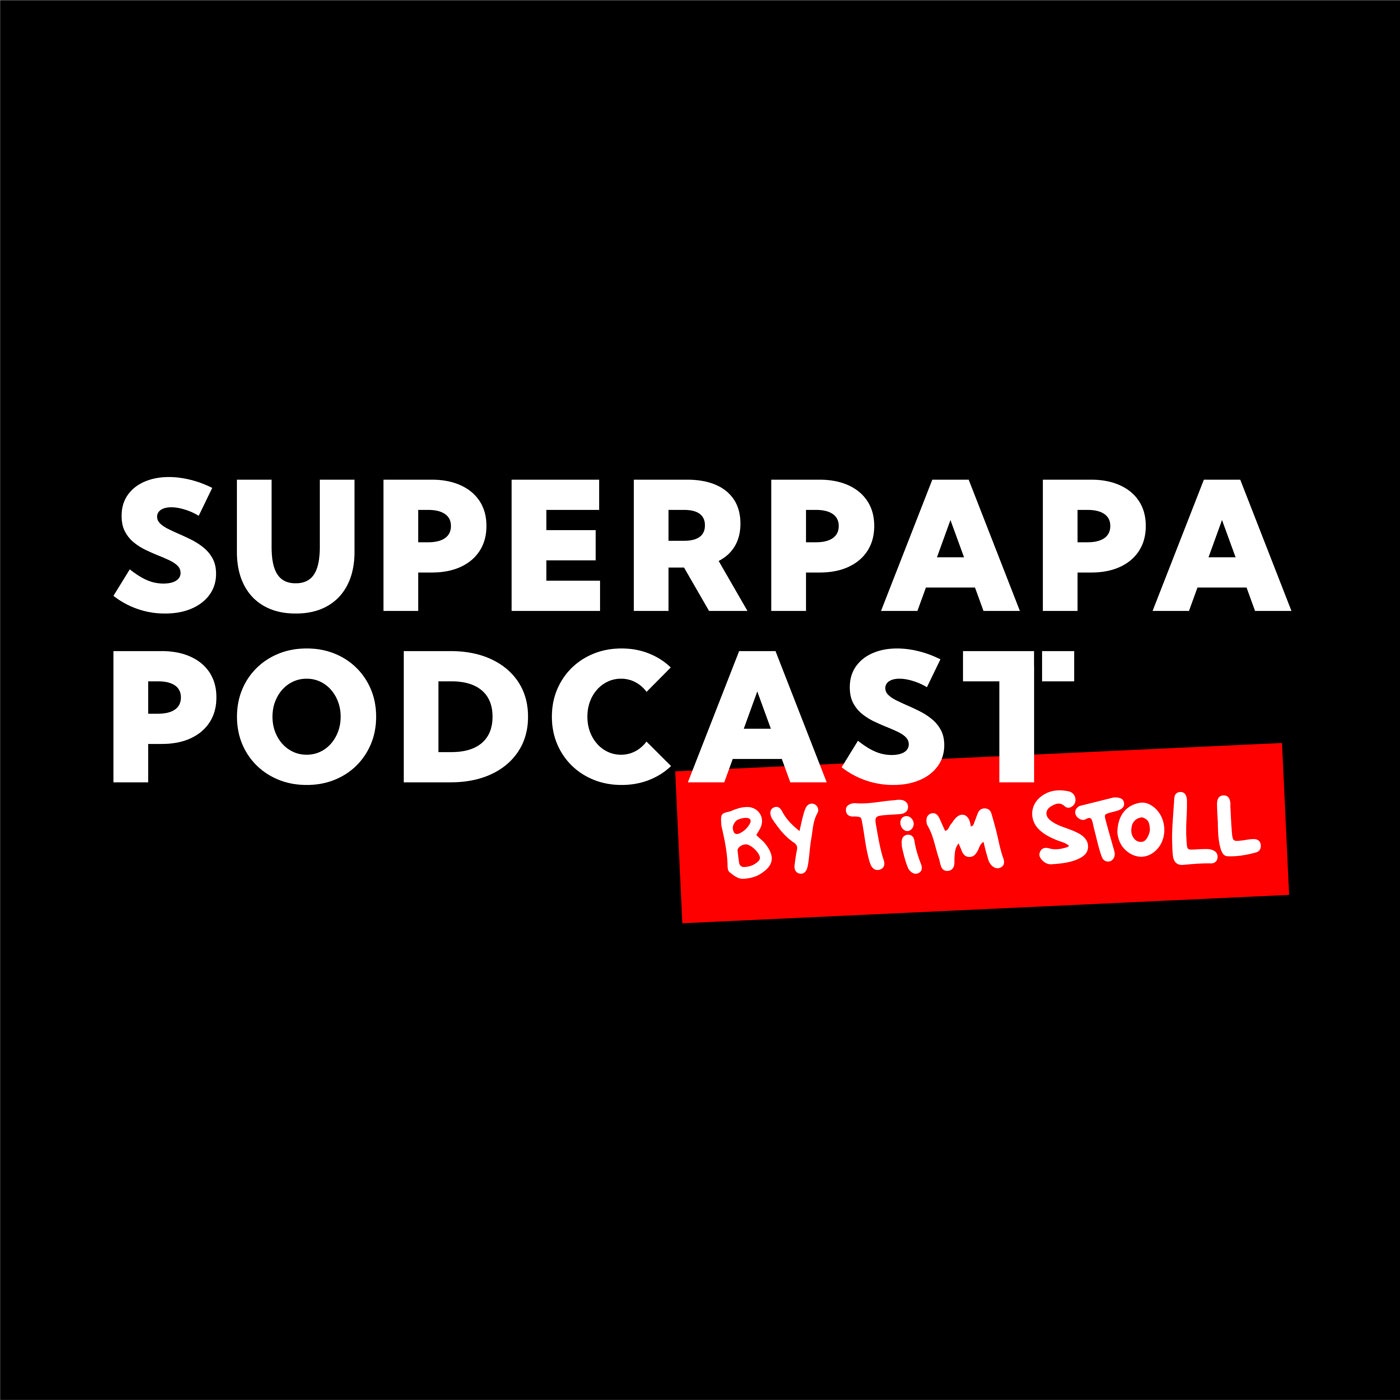 SUPERPAPA Podcast by TIM STOLL